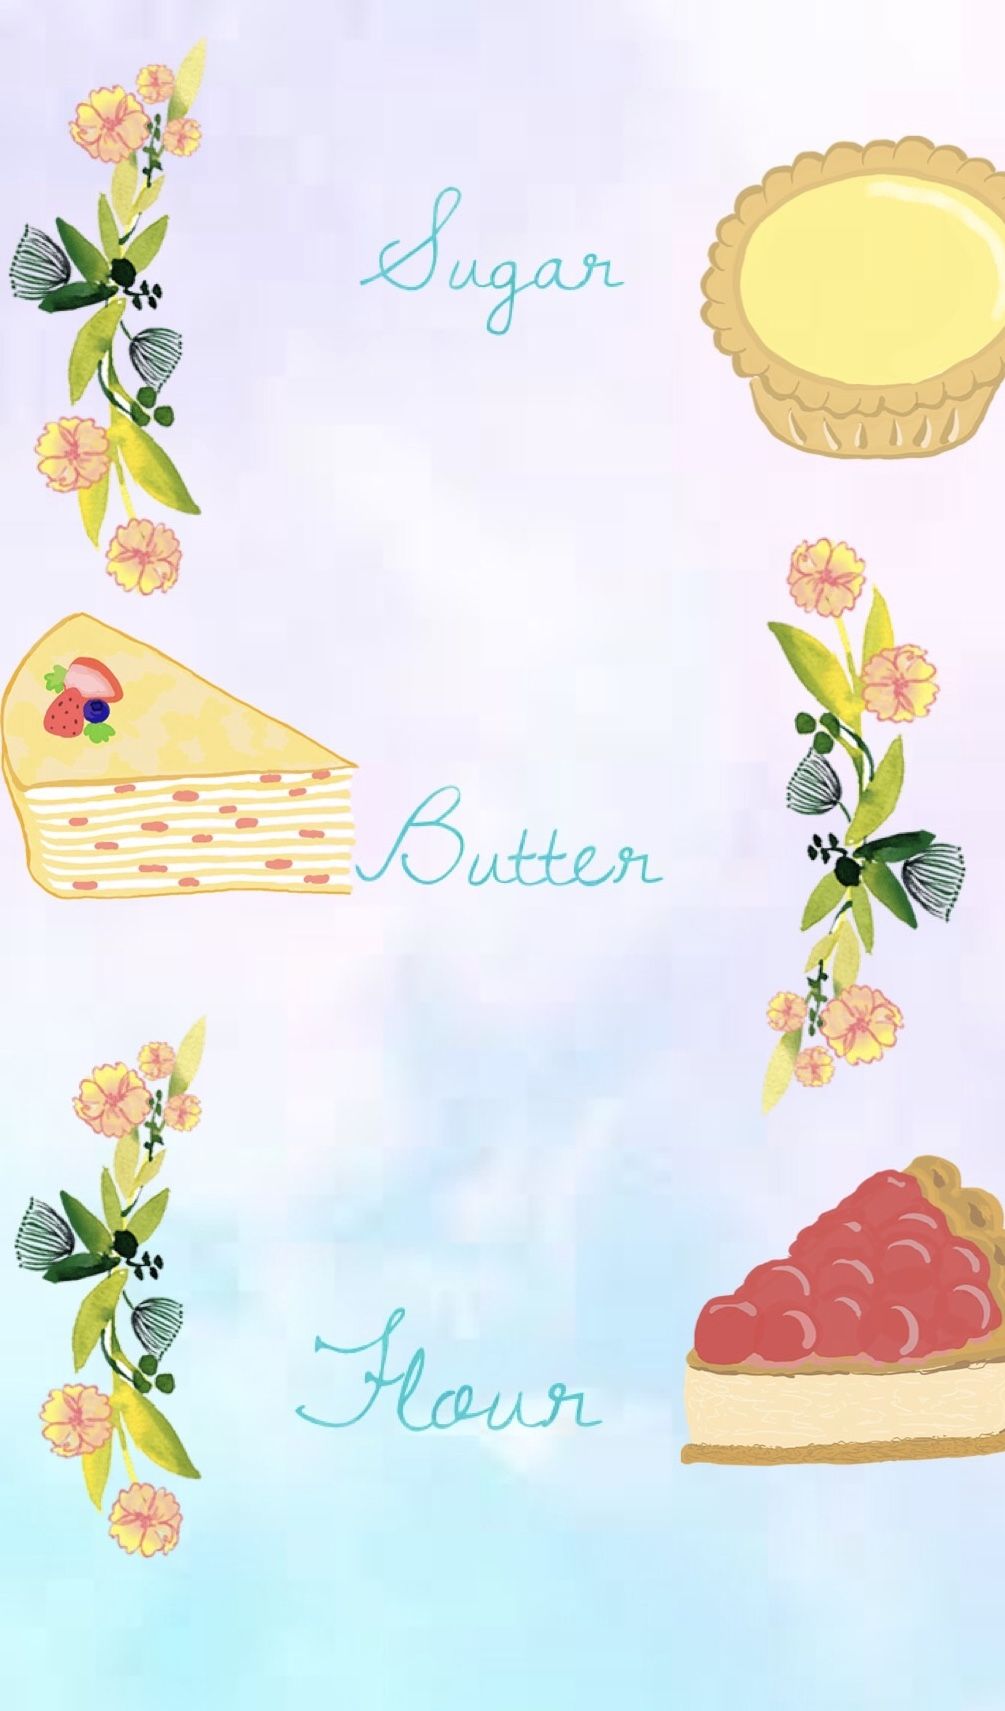 iPhone wallpaper Made by Dodie Fozter.